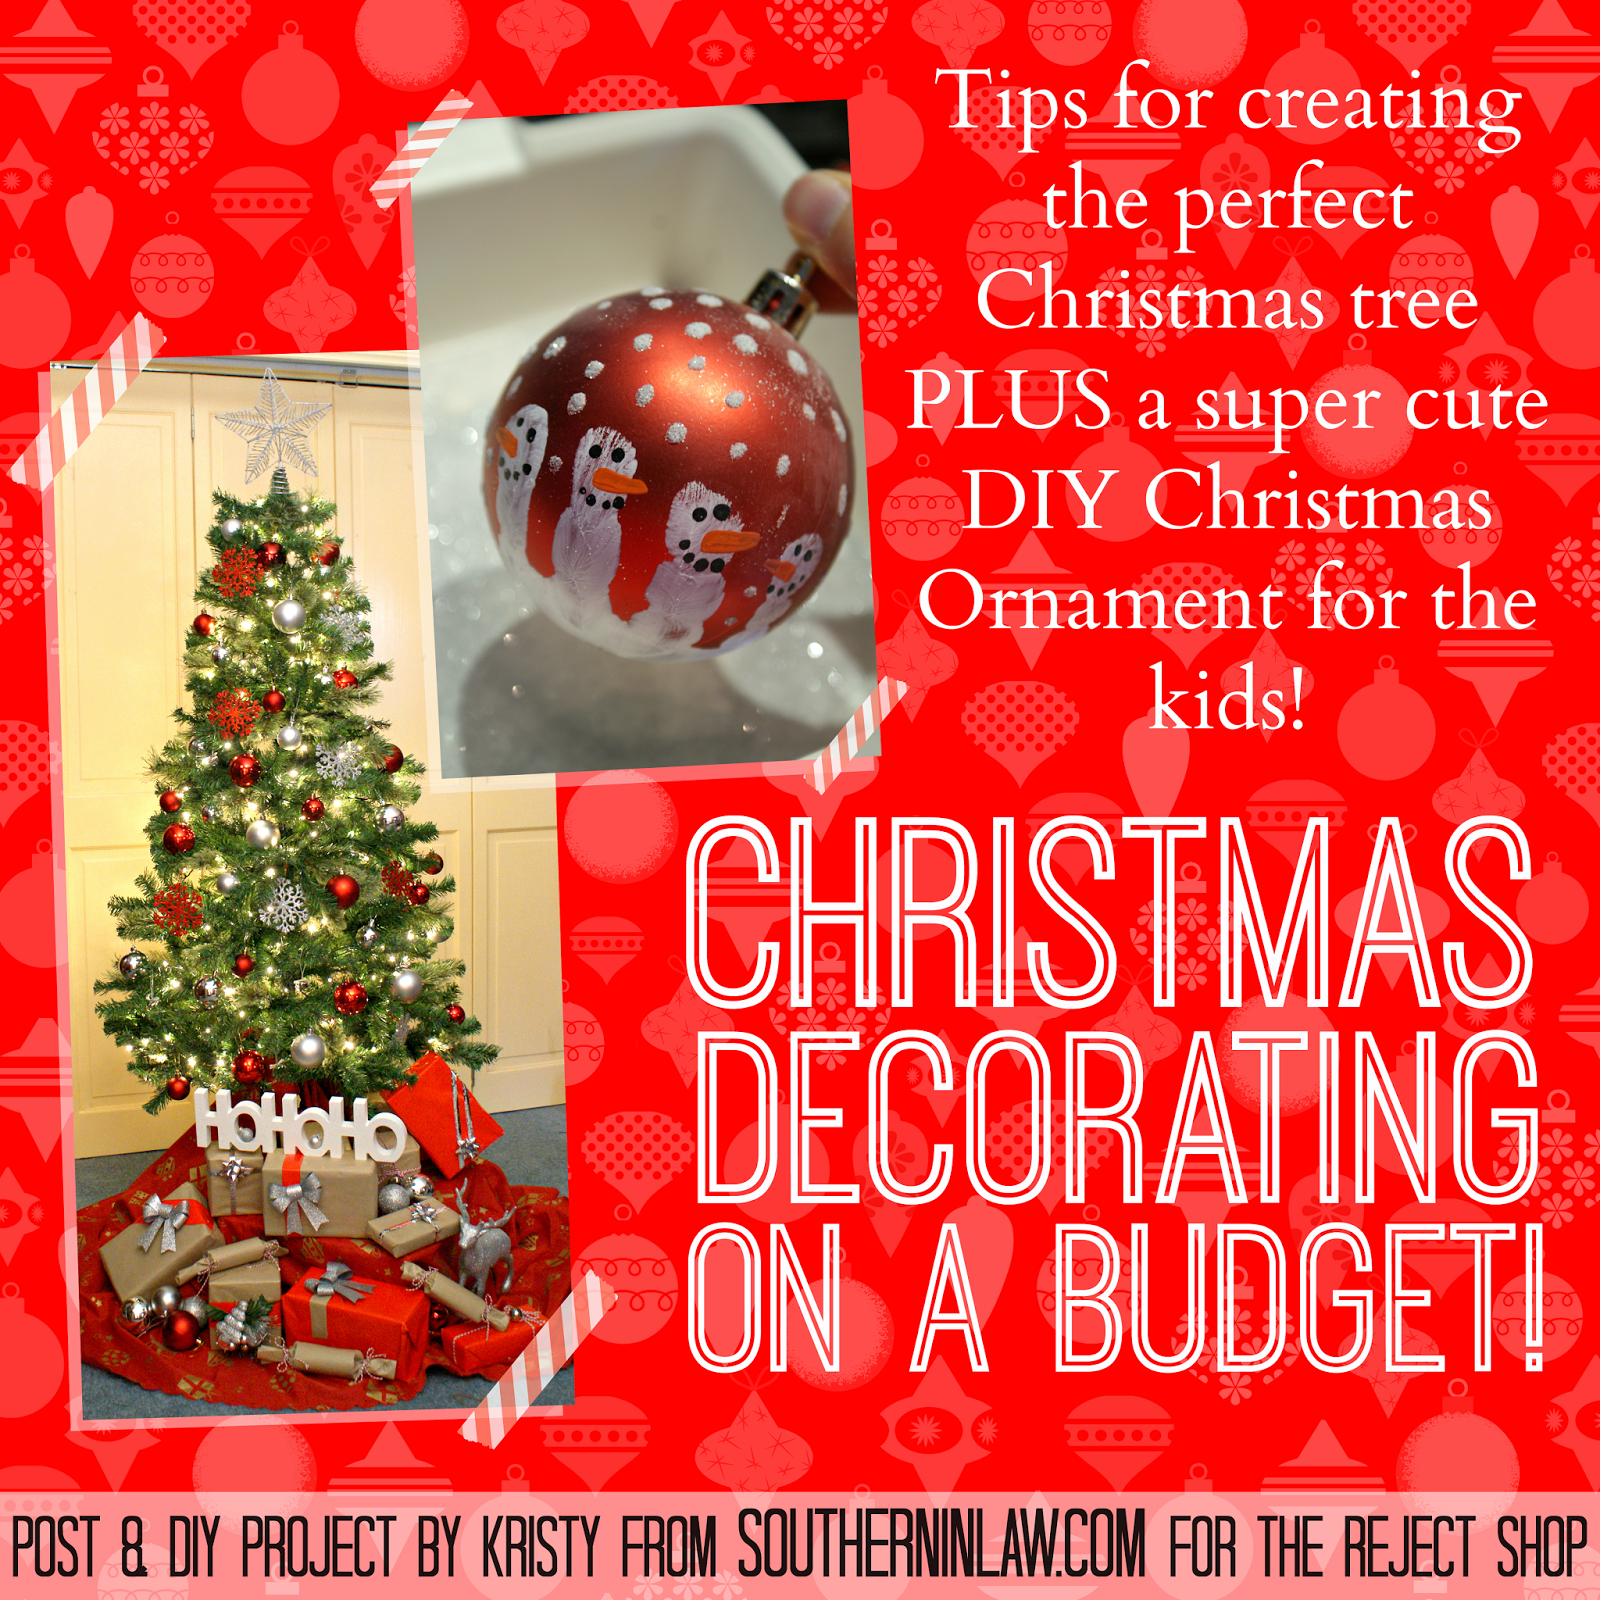 Christmas Decorating on a Budget - How to Decorate a Christmas Tree